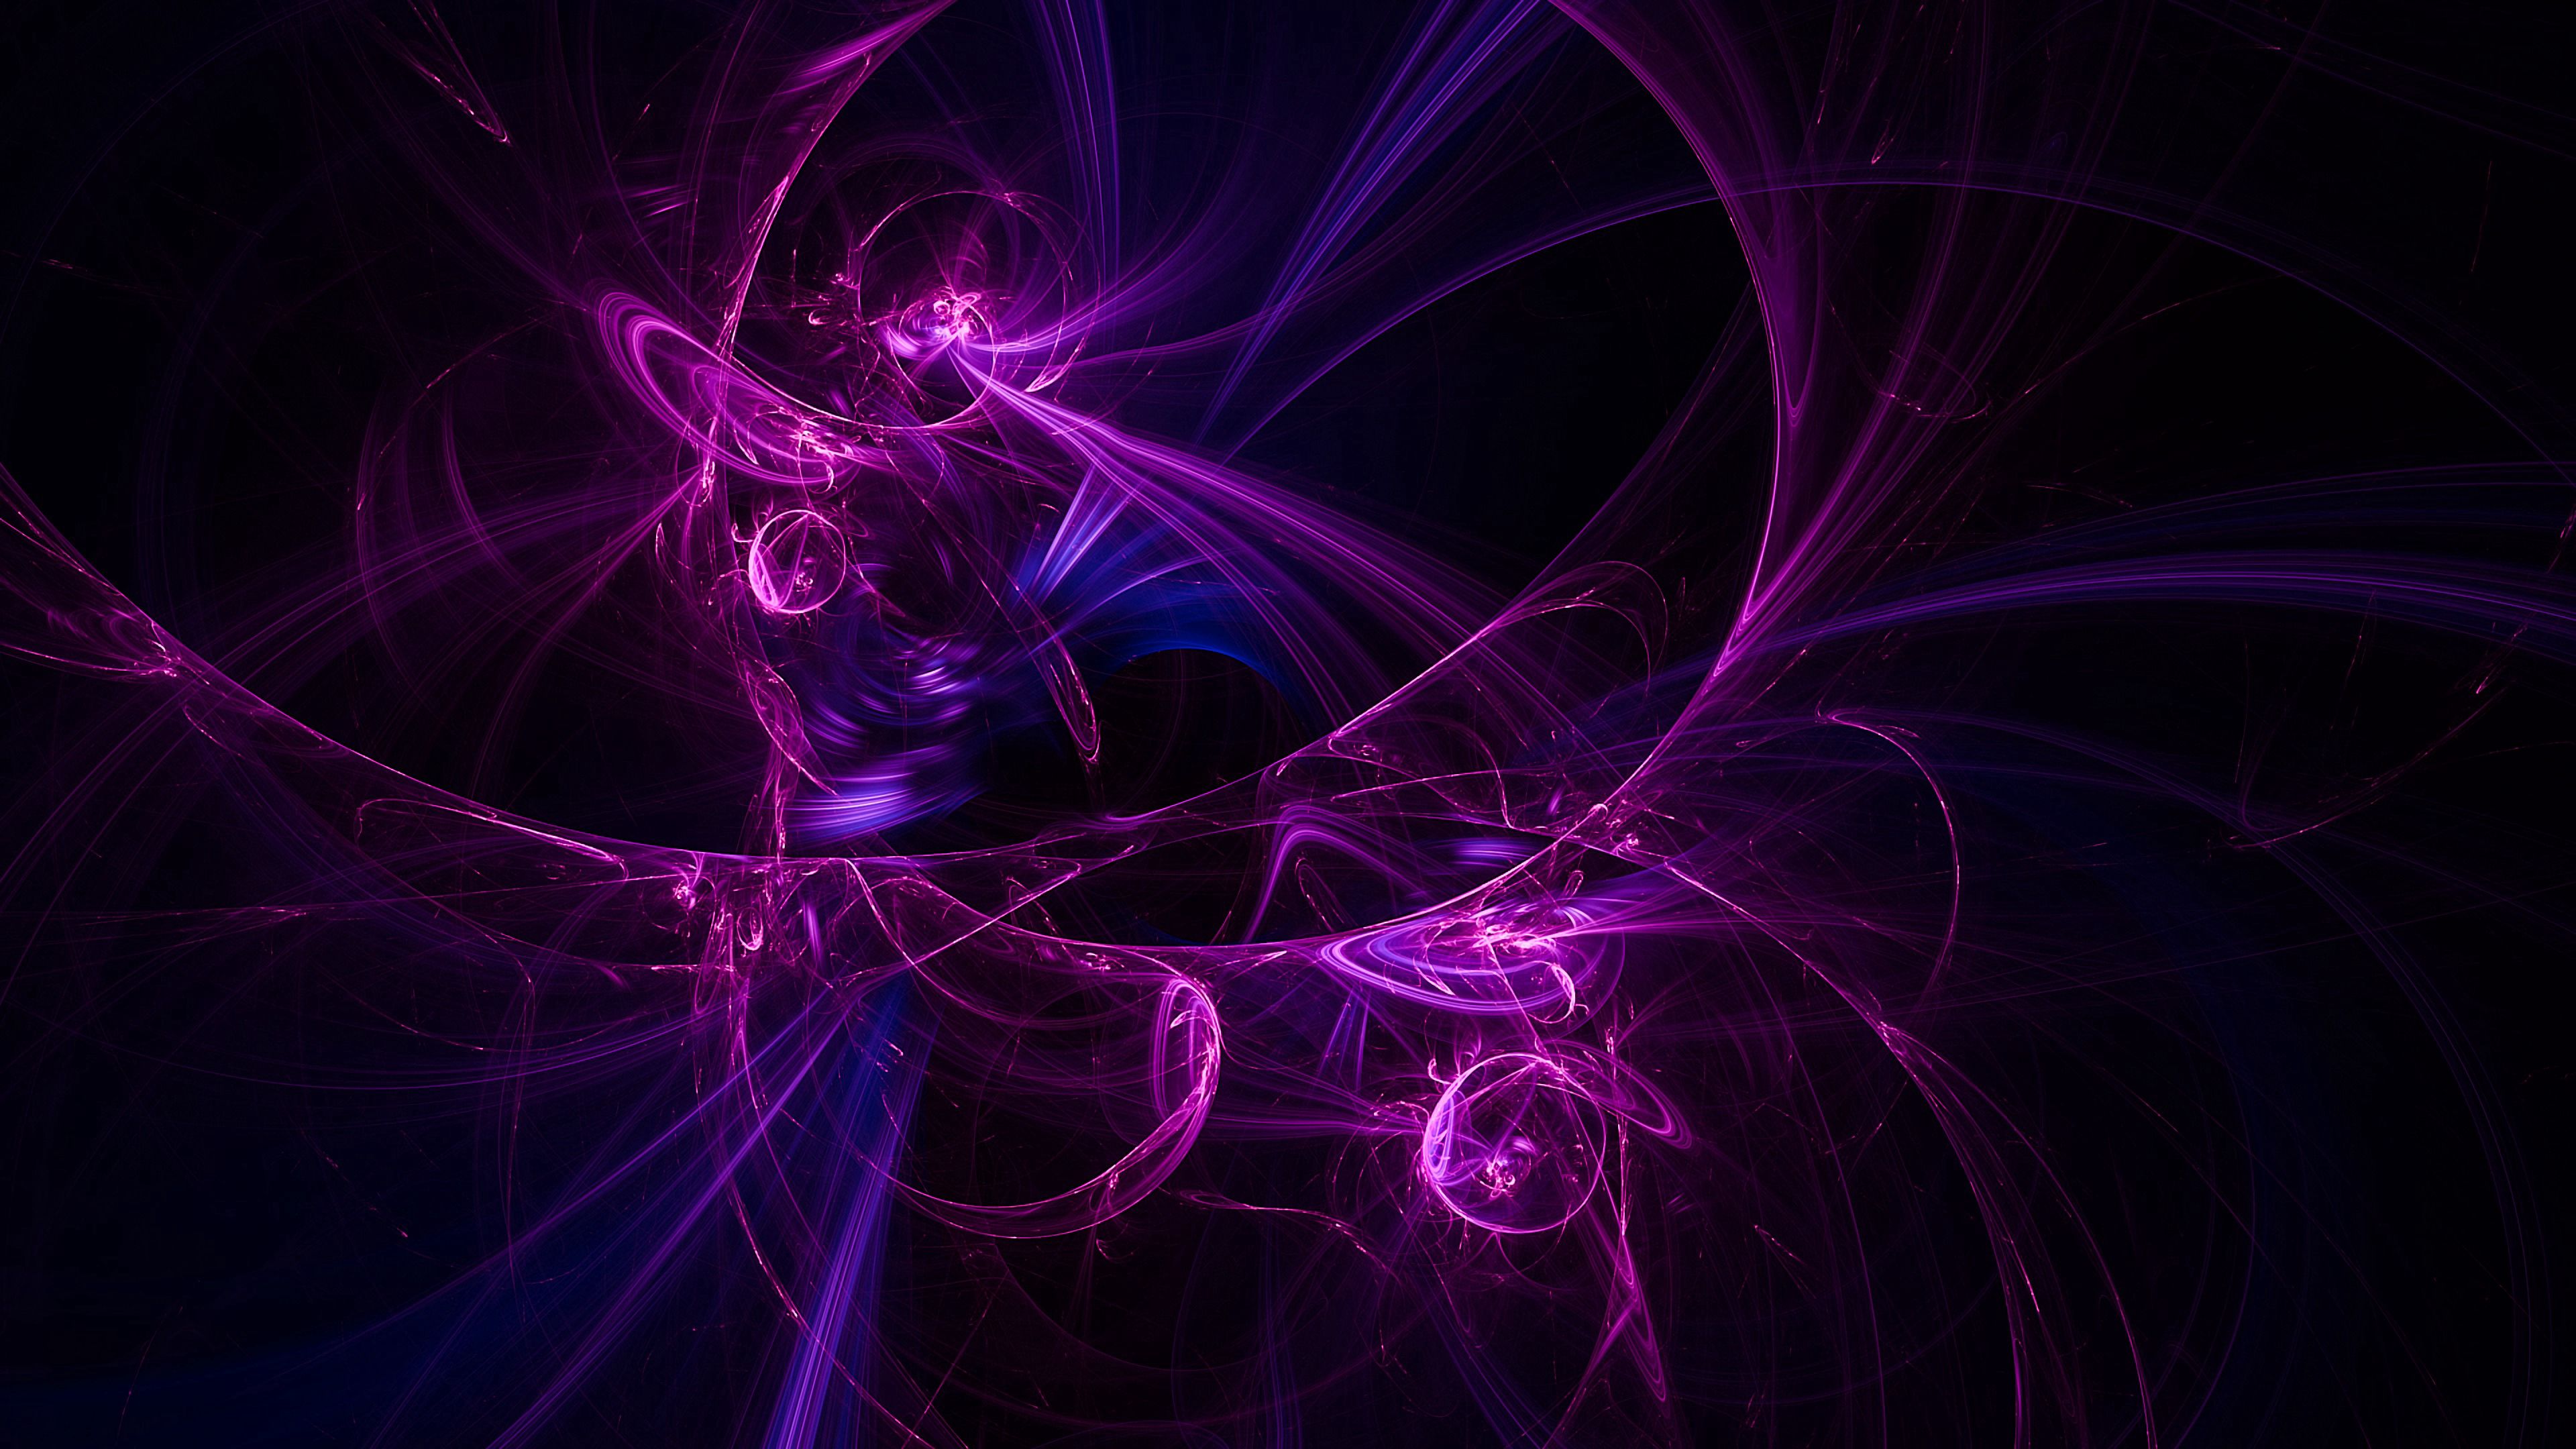 Free HD purple, abstract, violet, beams, rays, fractal, radiation